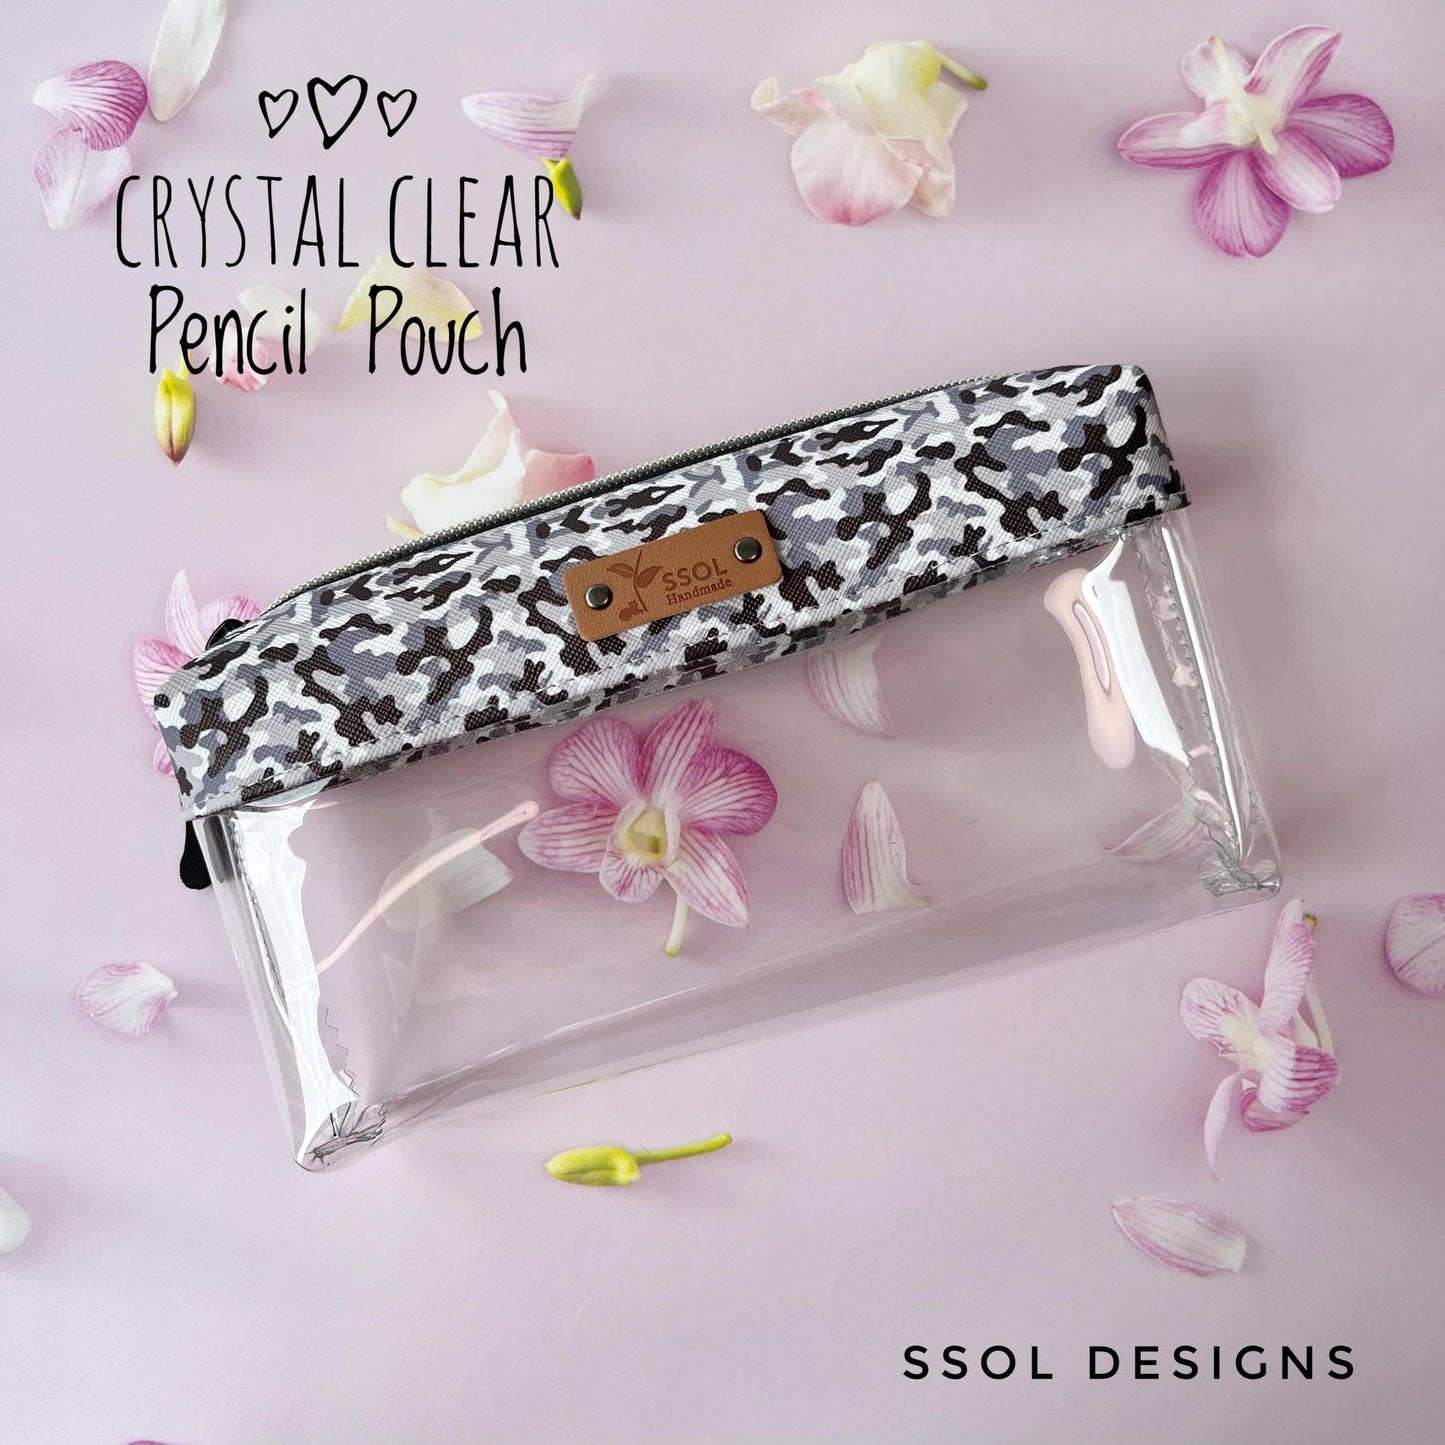 Crystal Clear Pencil Pouch - CCPP10